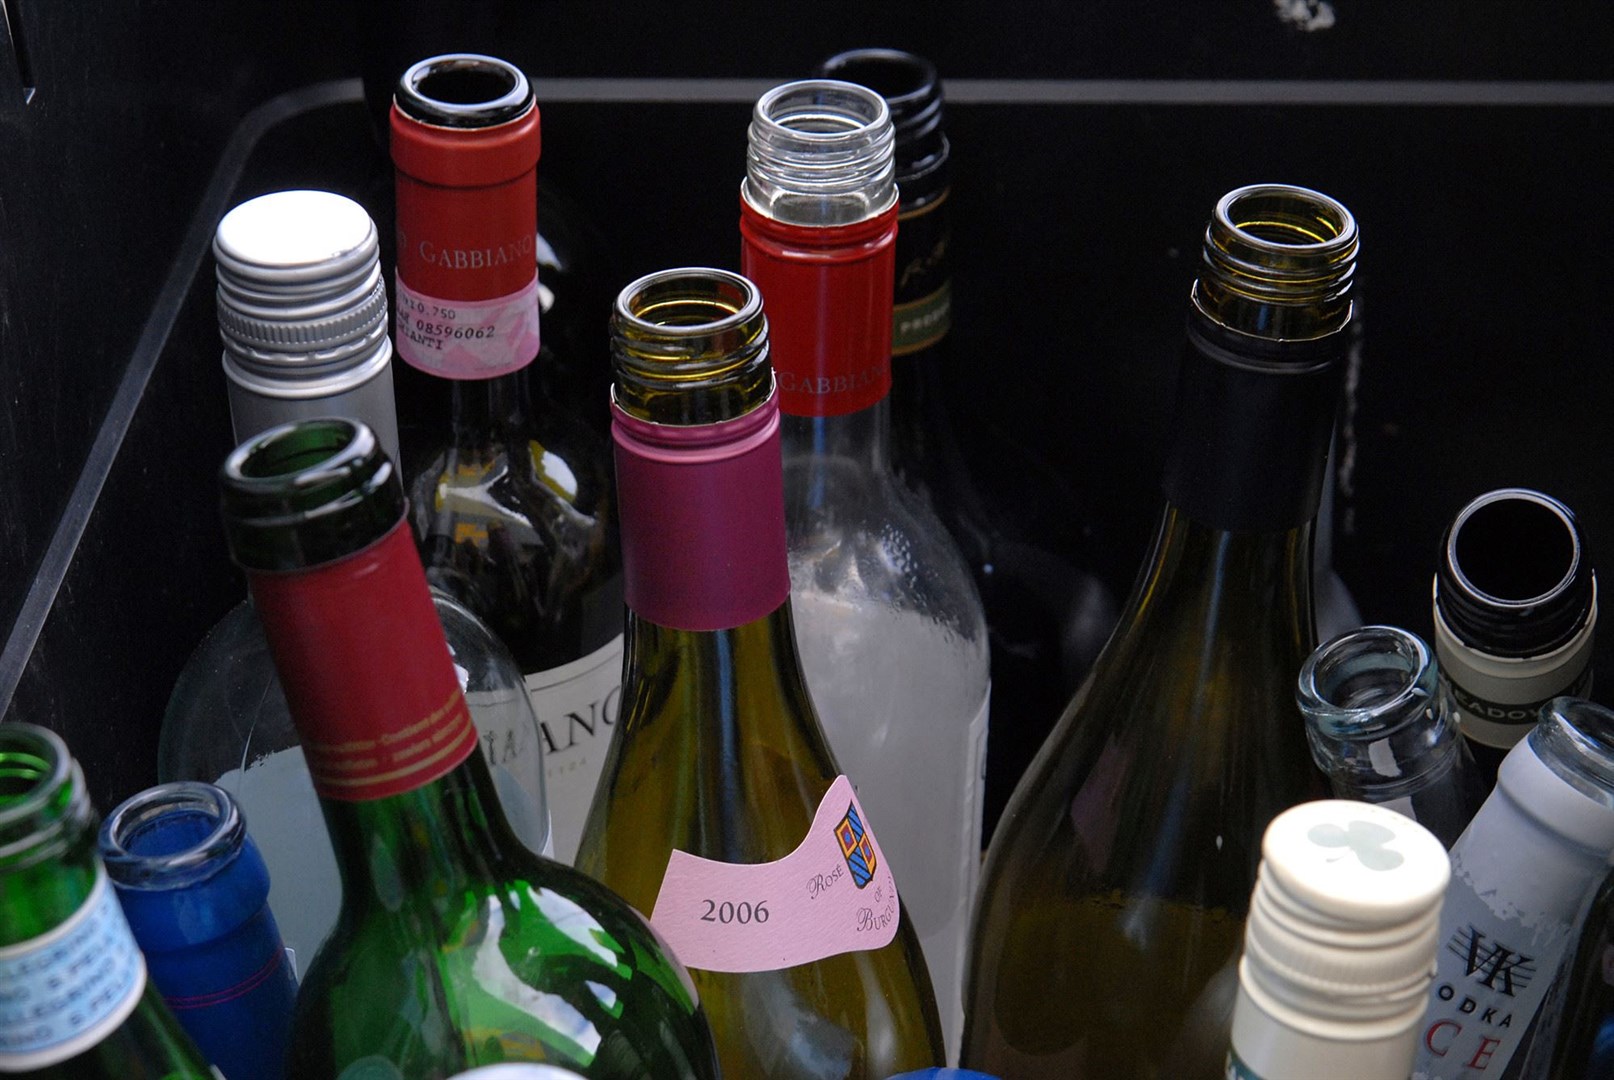 People no longer need to separate glass according to colour for recycling.